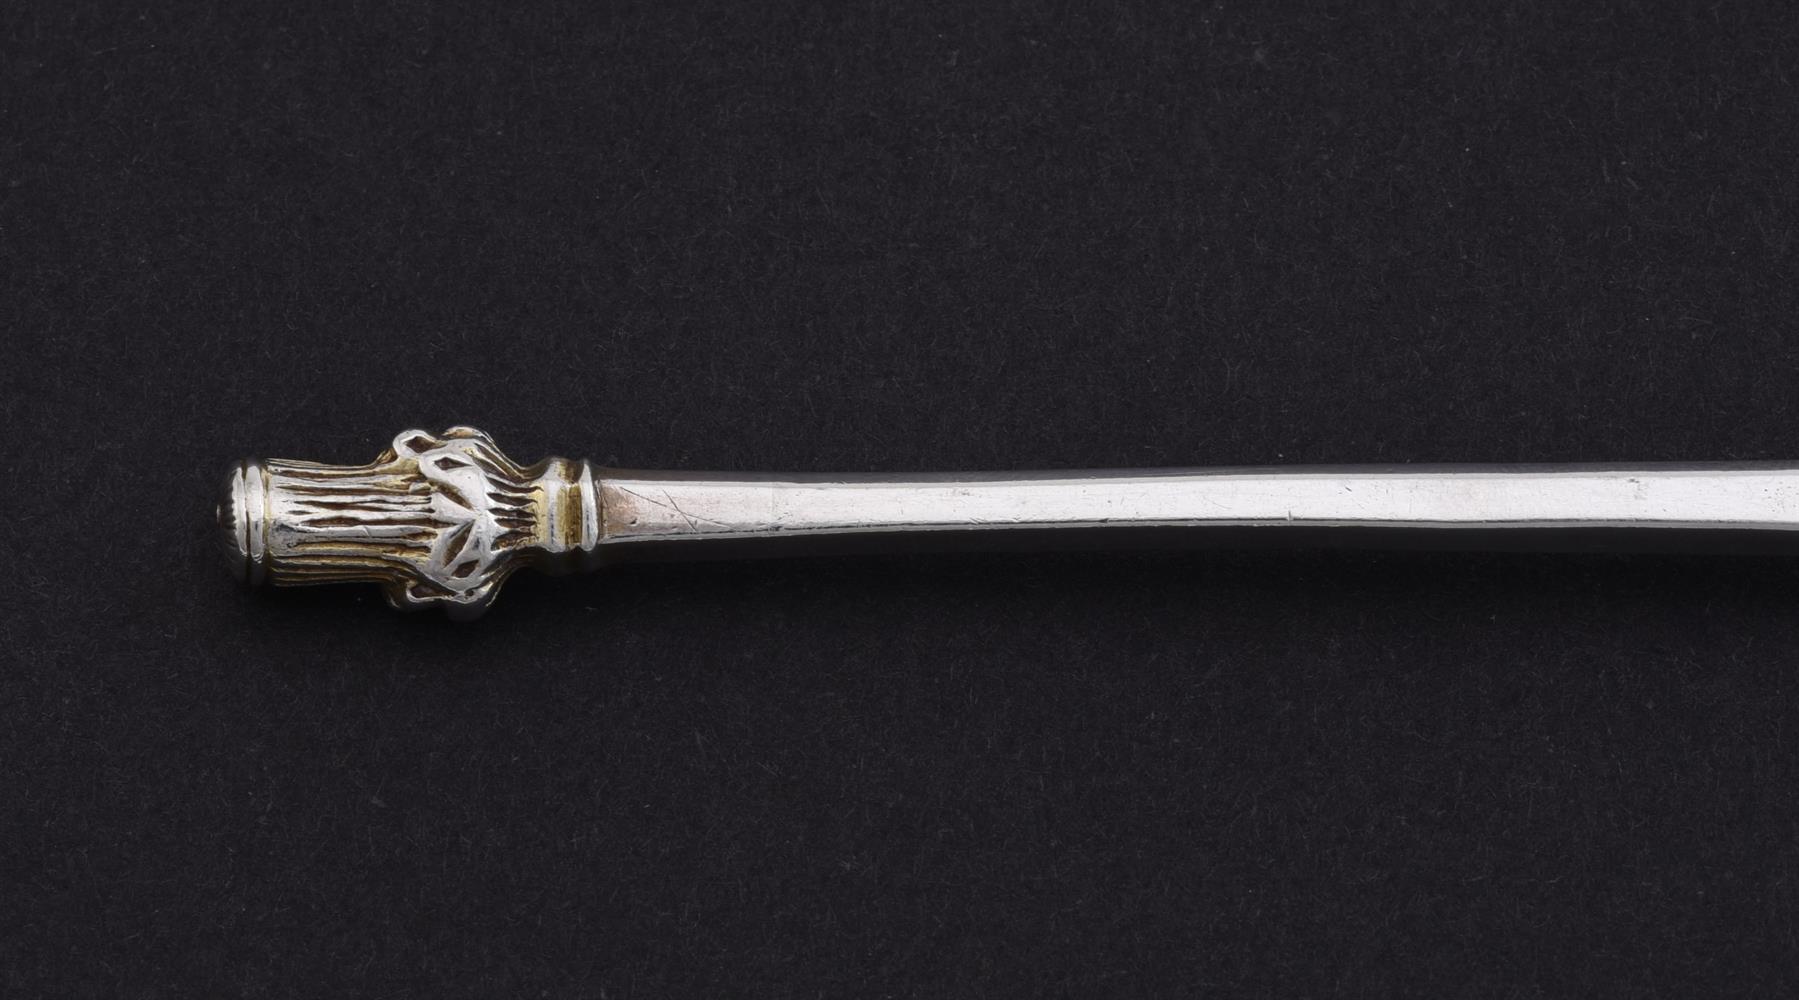 AN UNASCRIBED PROVINCIAL SILVER MAIDENHEAD SPOON, MAKER'S MARK S IN REVERSE - Image 6 of 7